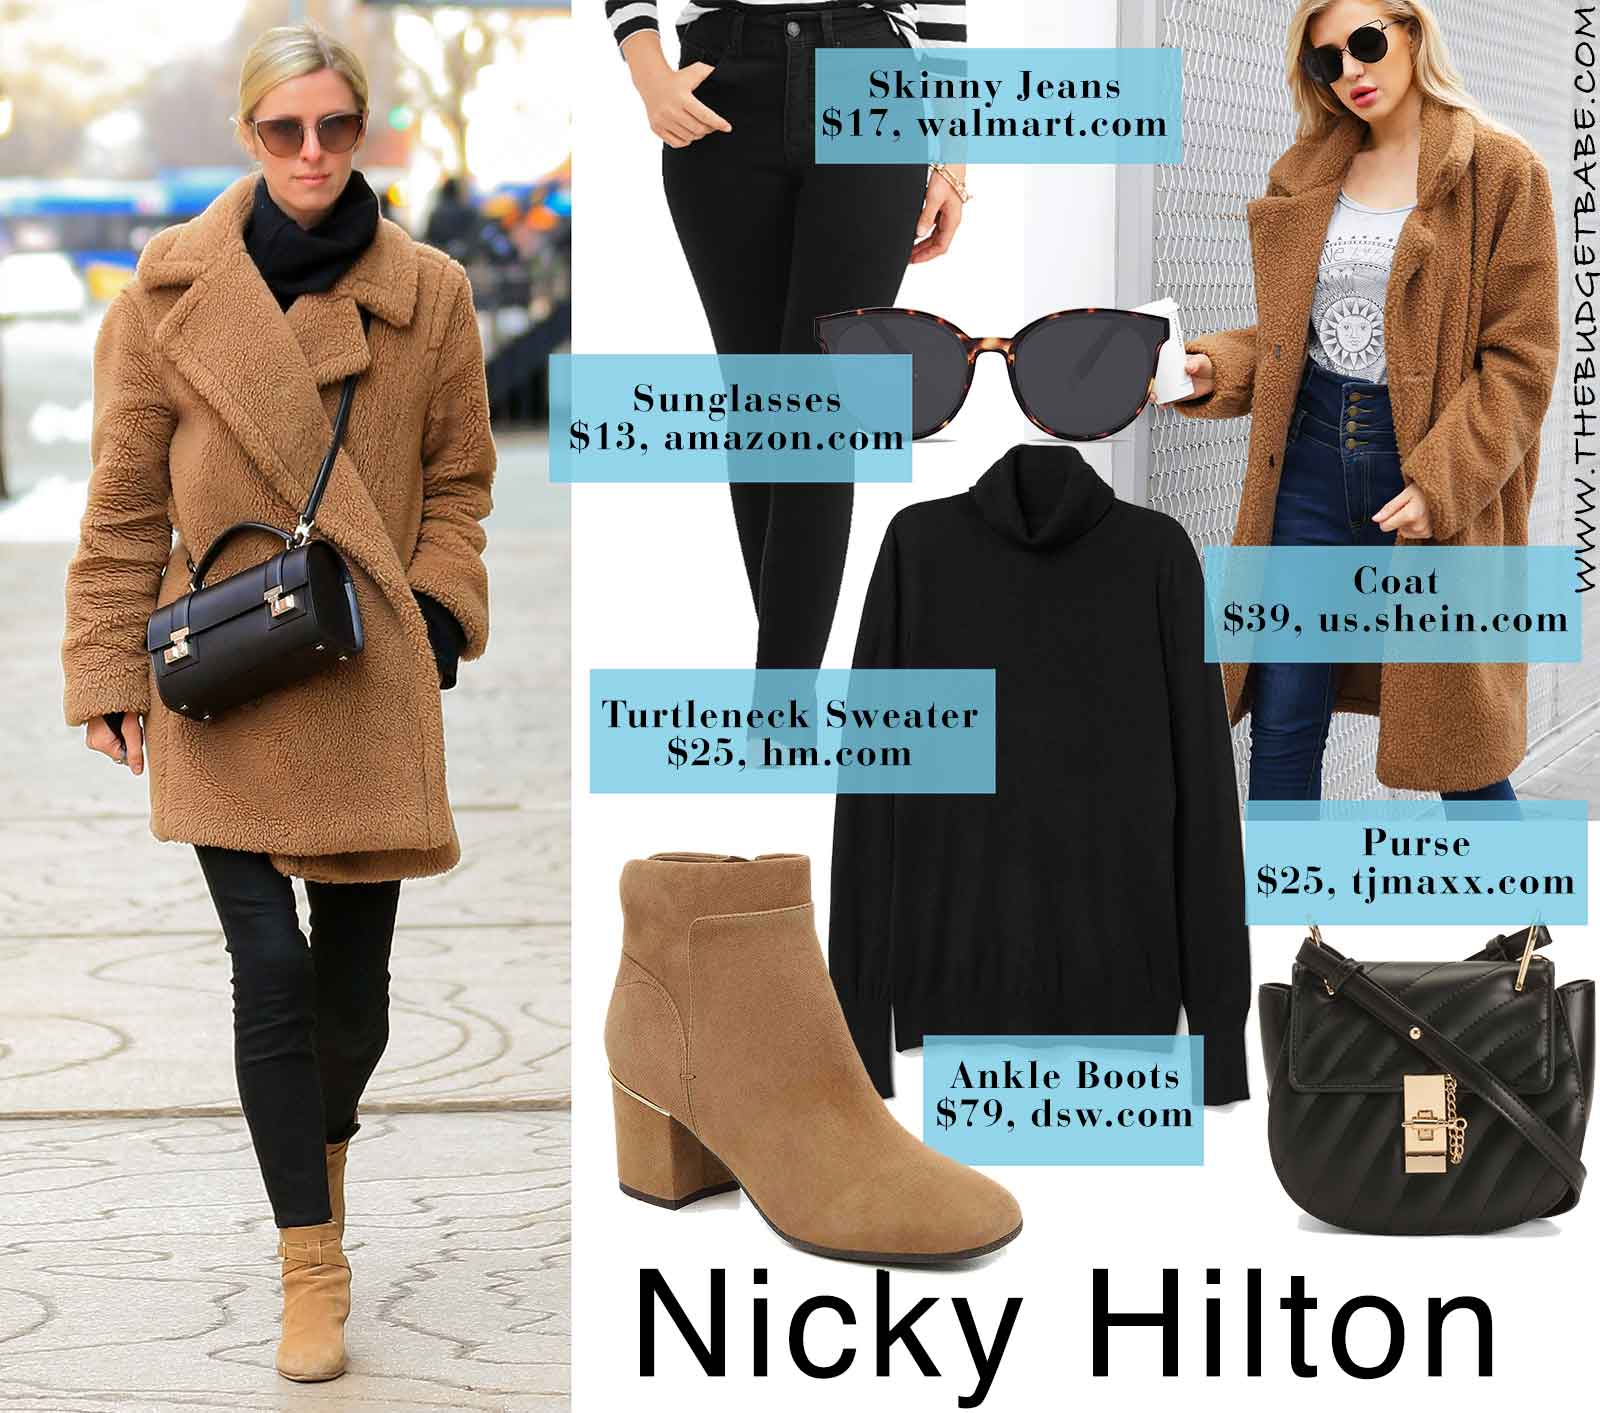 Nicky Hilton's teddy coat and ankle boots look for less